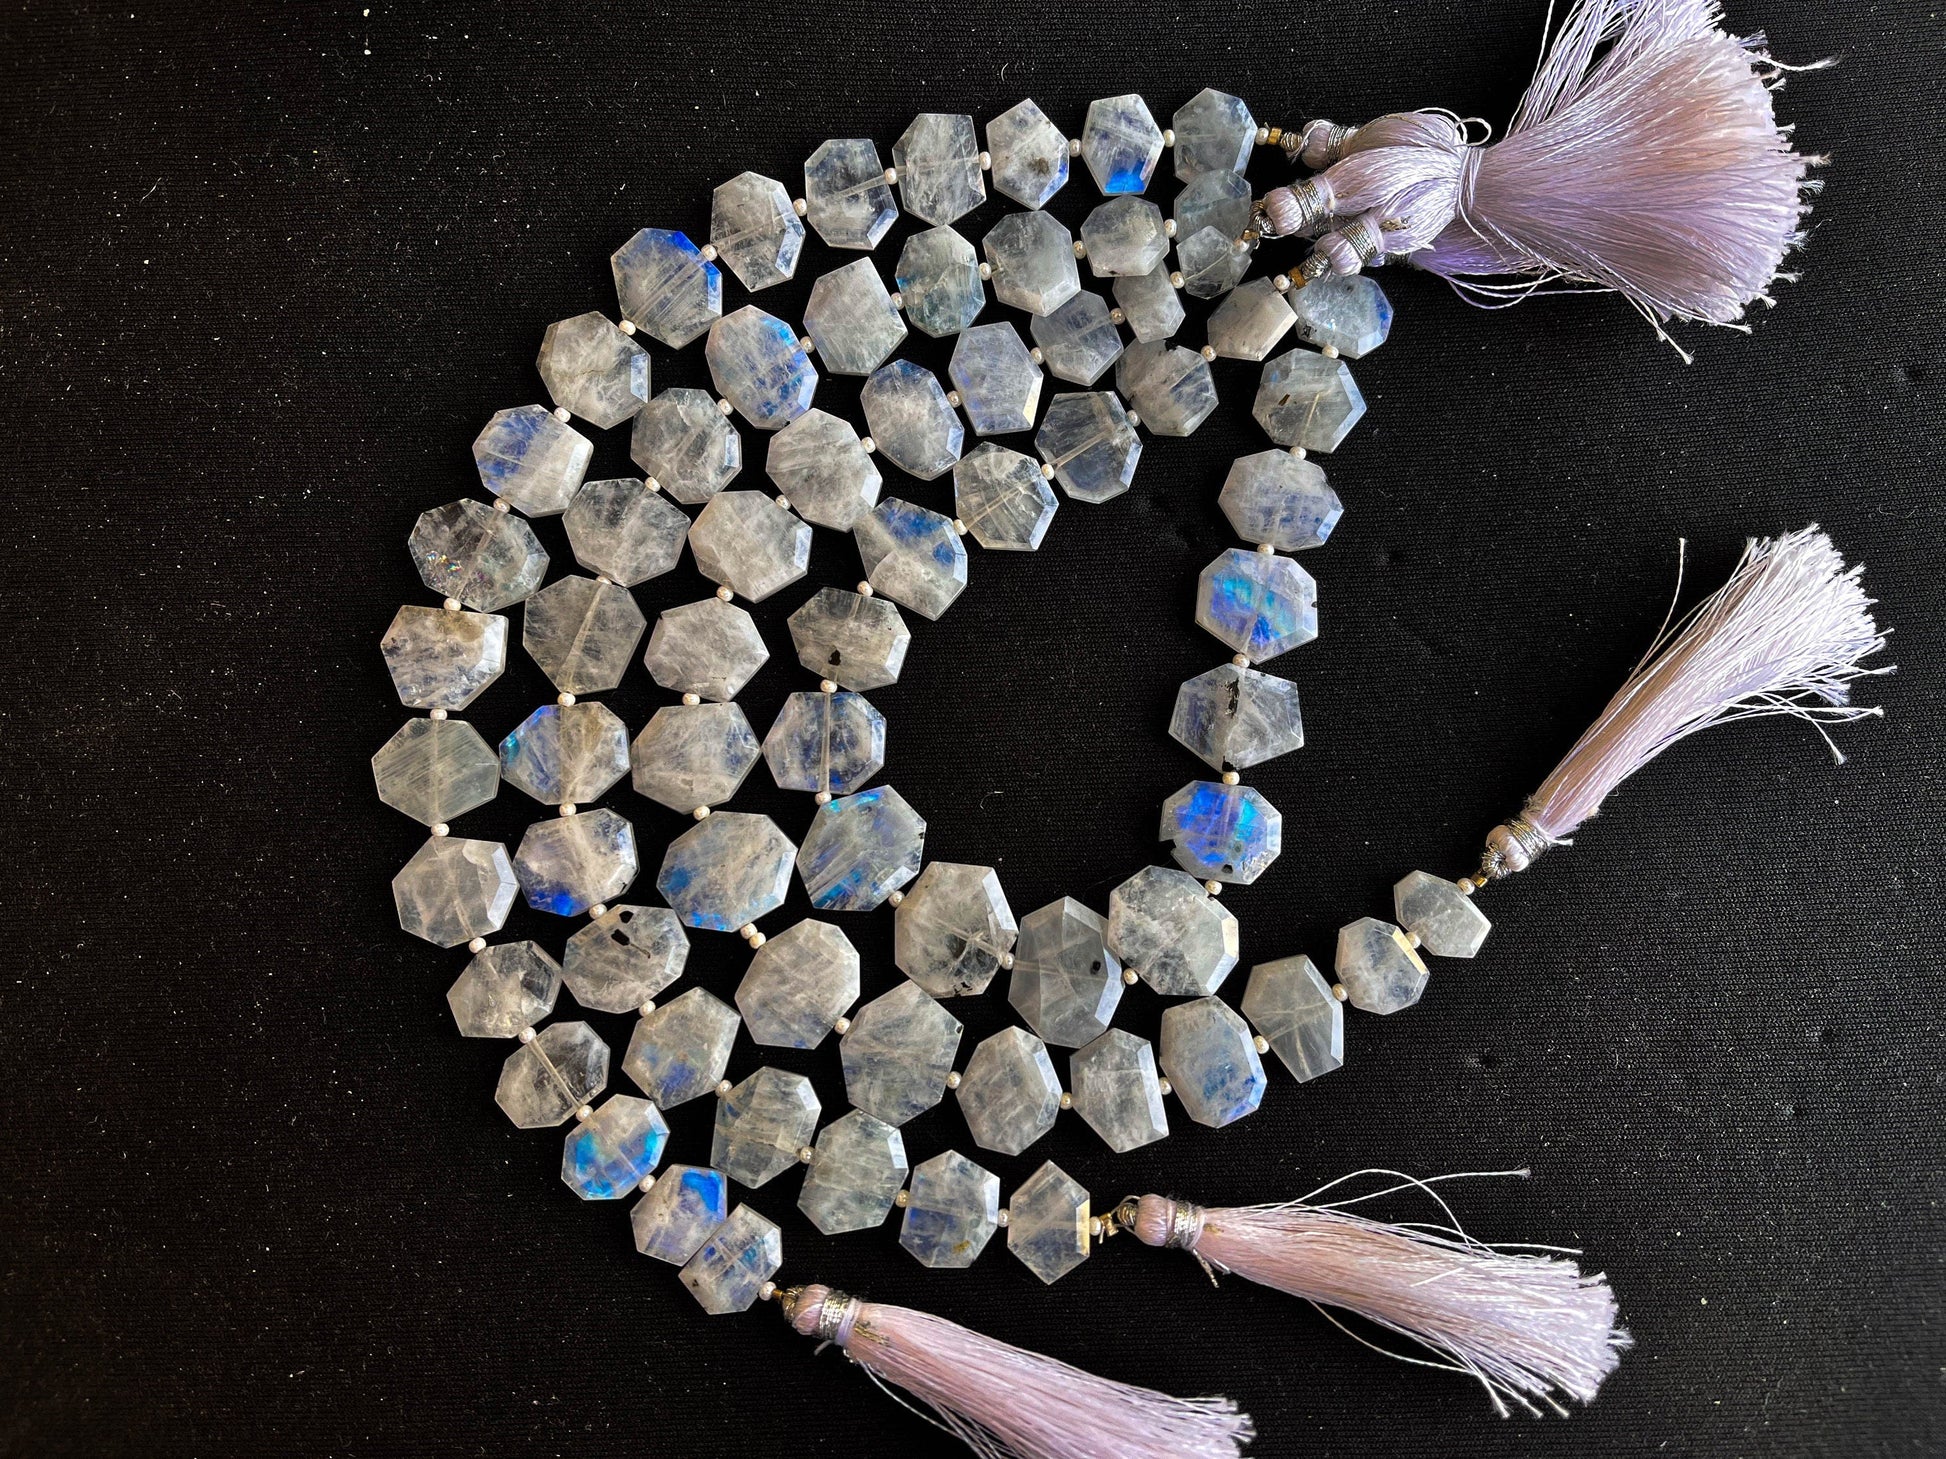 17 Pieces RAINBOW MOONSTONE Fancy Crown Cut Beads | 8 Inch String | Natural Gemstone Beads | Beadsforyourjewellery Beadsforyourjewelry